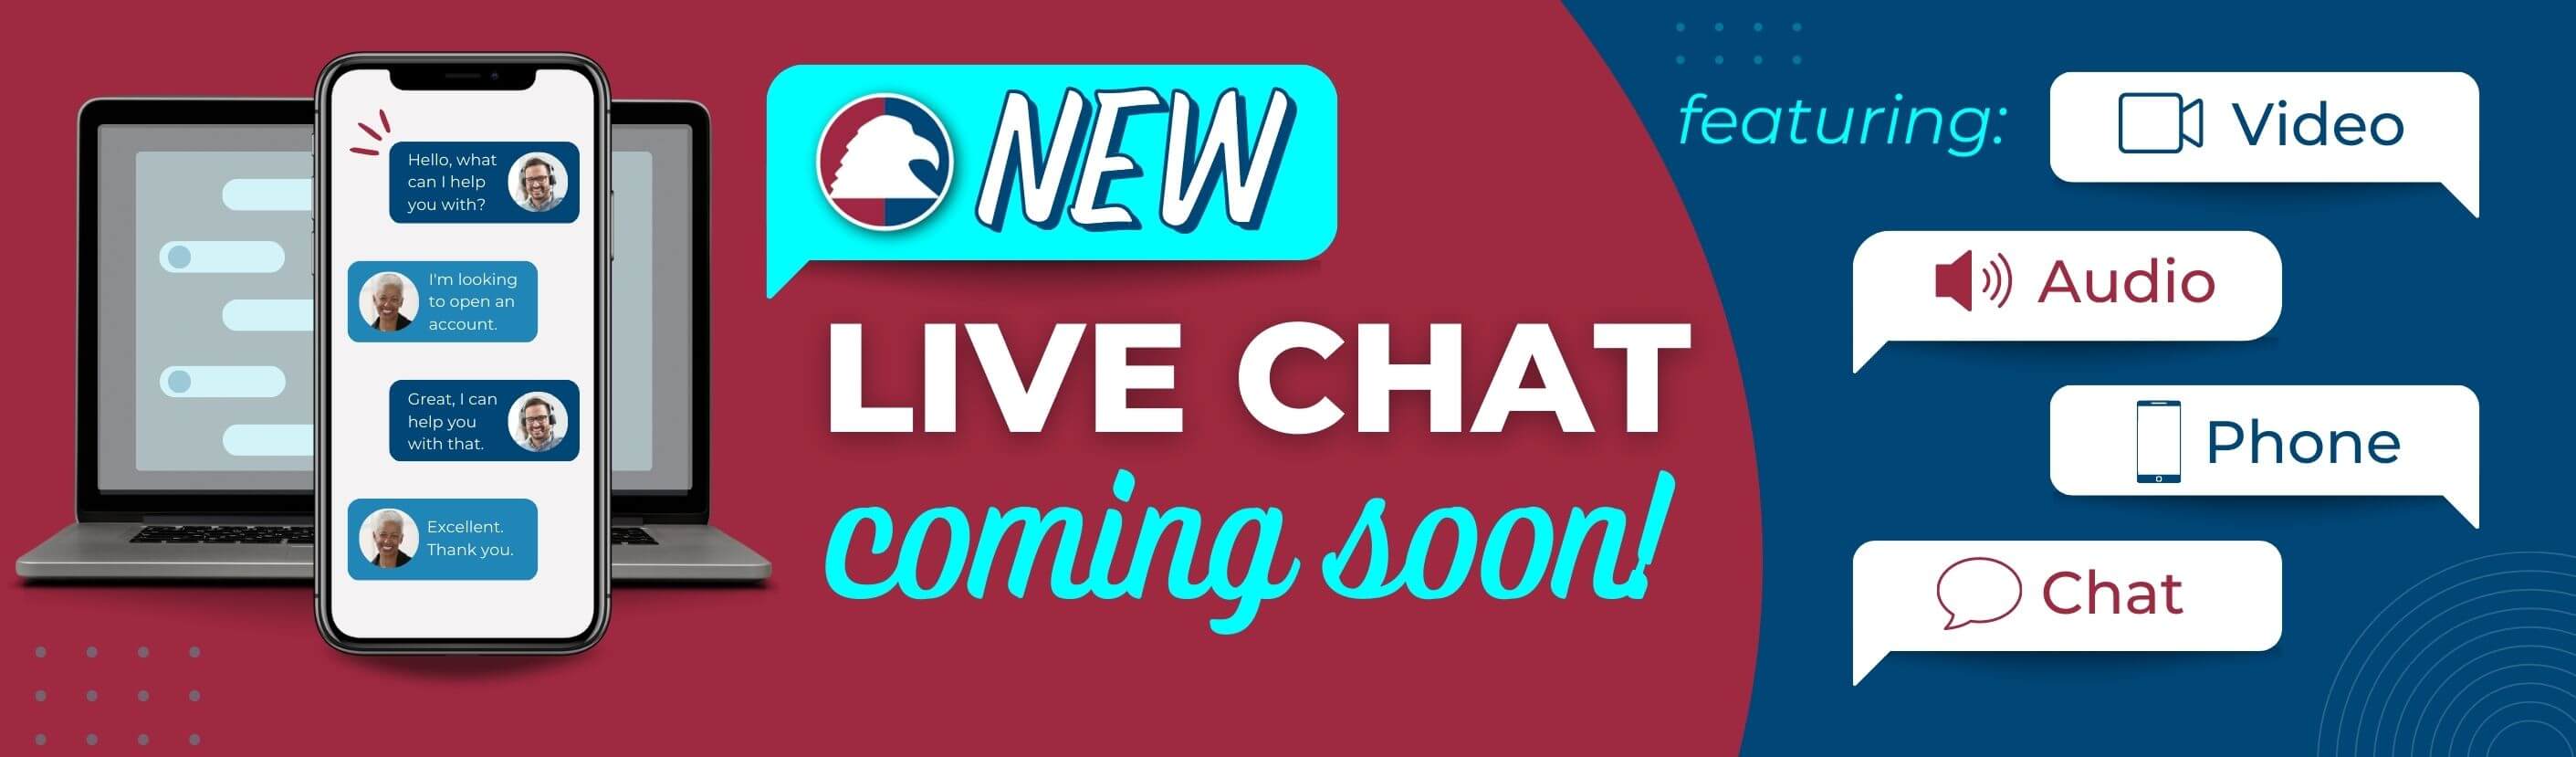 New CFCU Live Chat coming soon